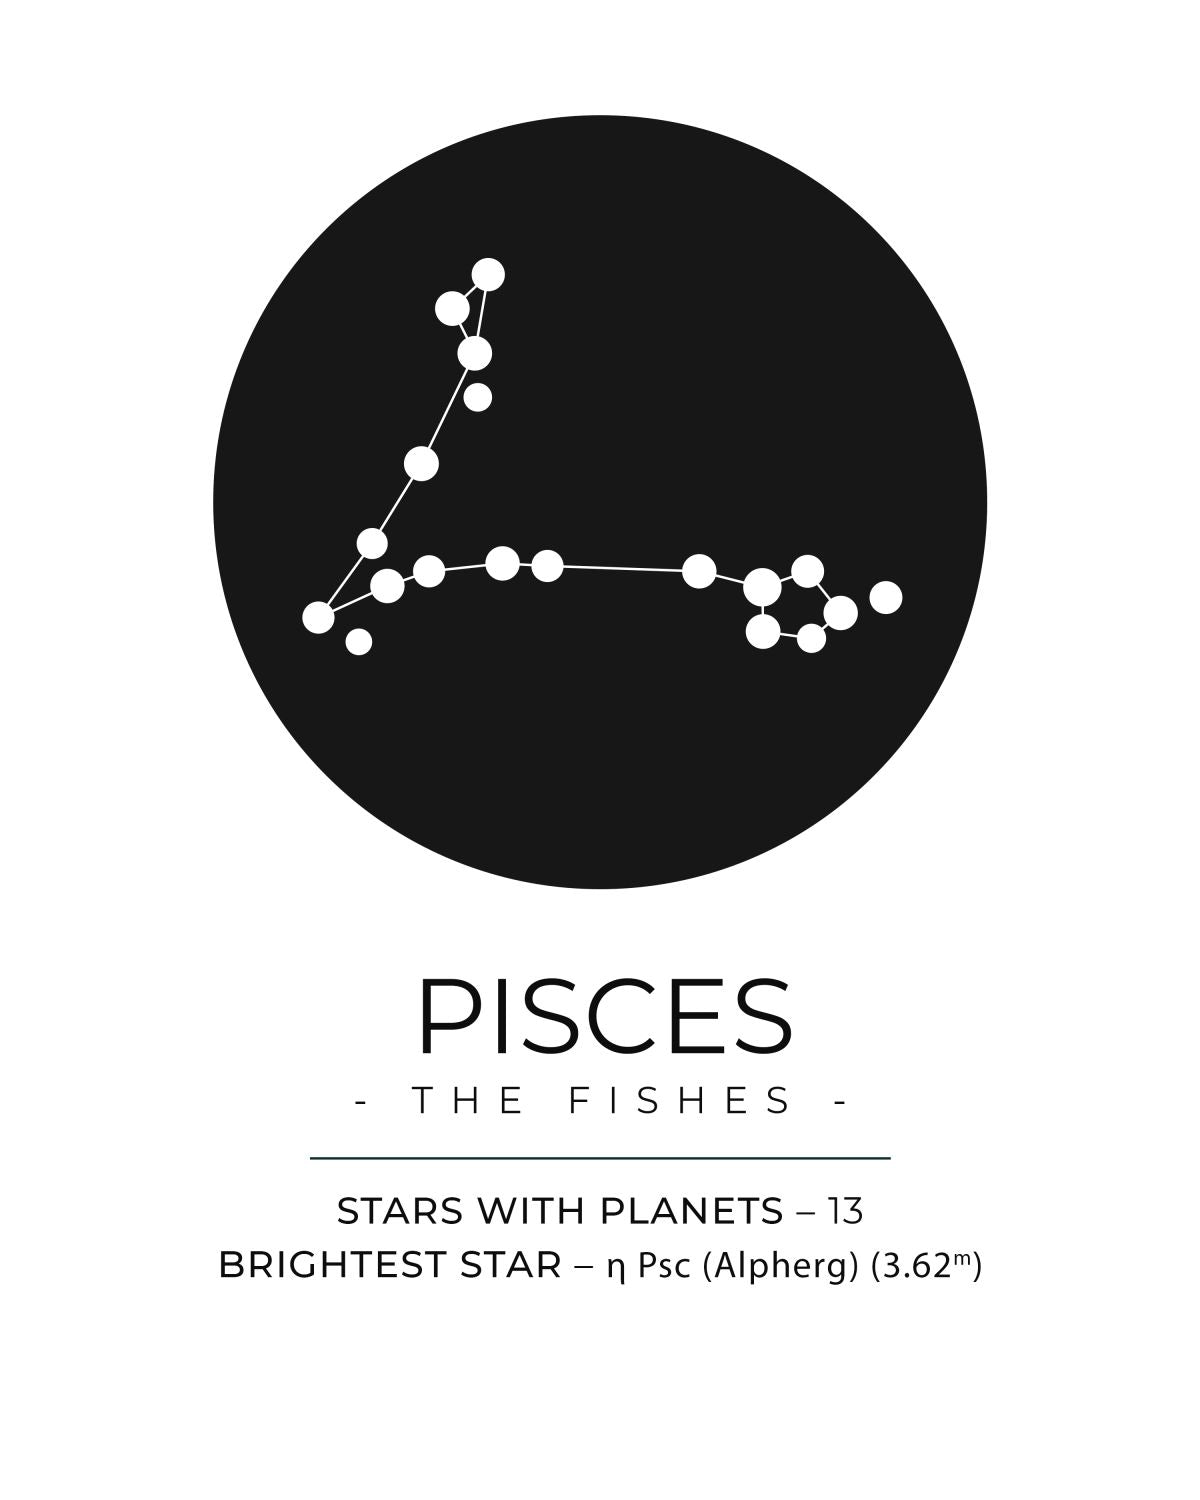 The Pisces Constellation